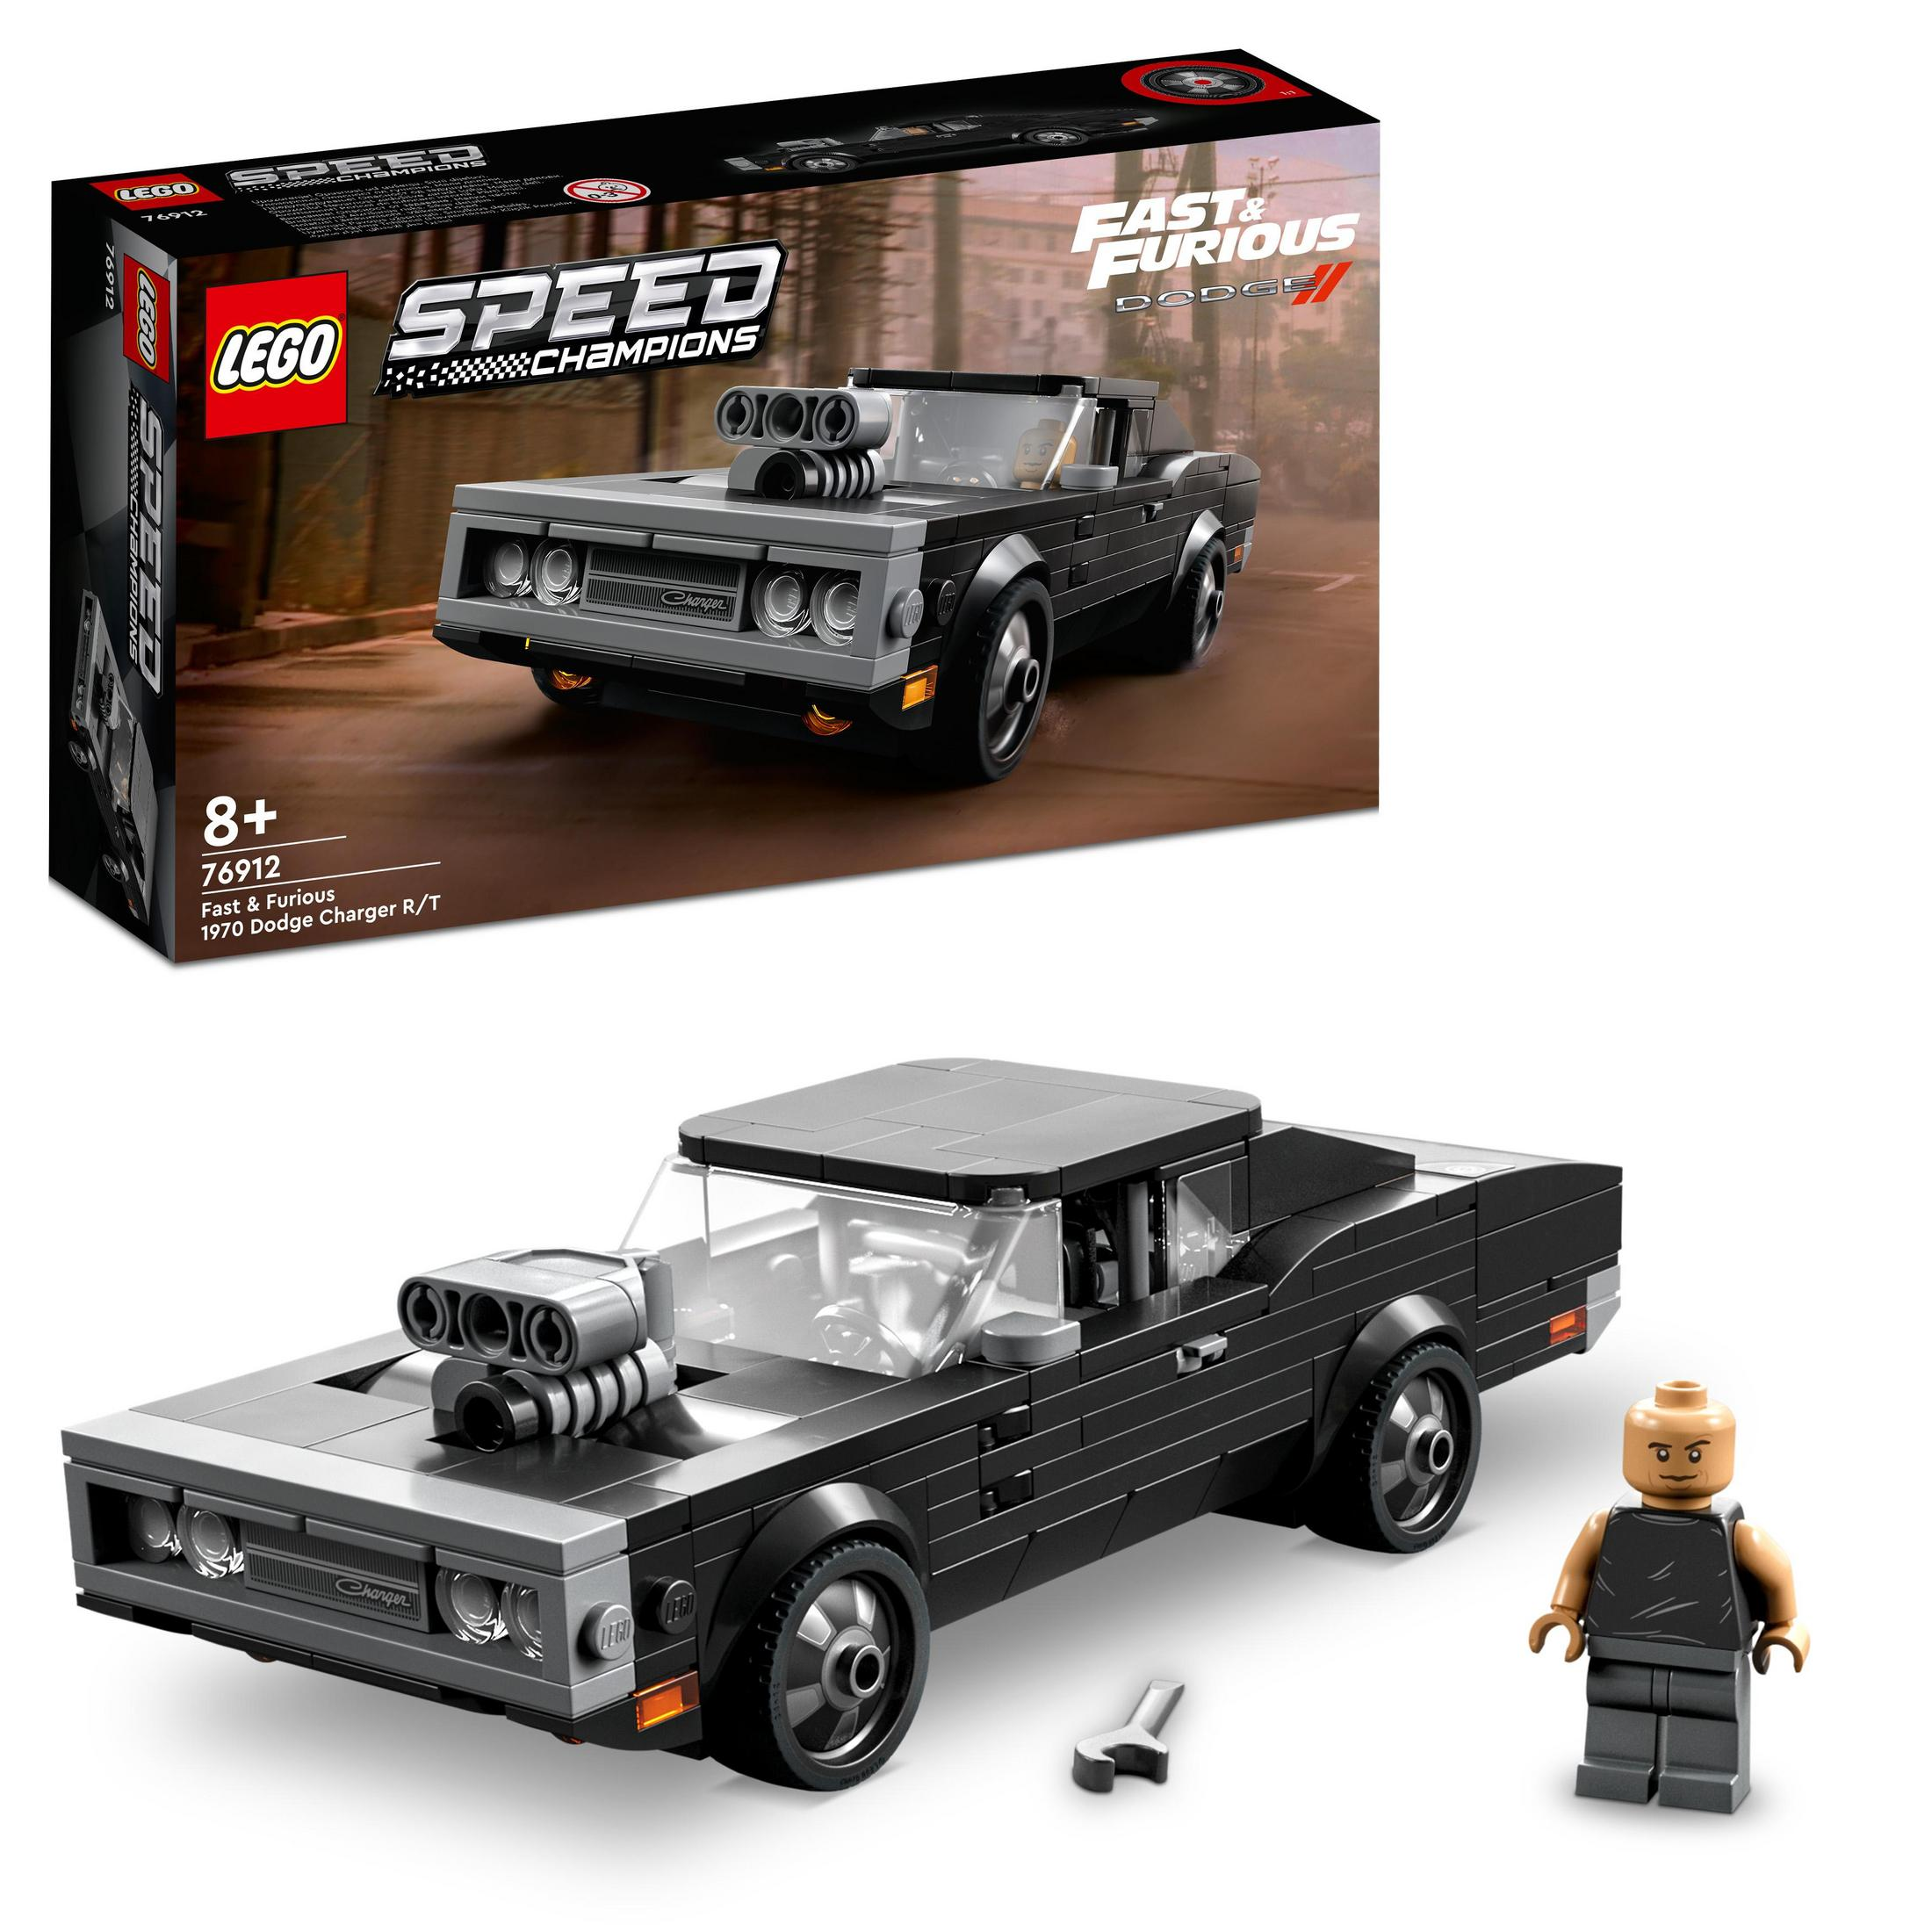 CHARGER 1970 DODGE LEGO & 76912 FURIOUS FAST R/T Champions LEGO Speed